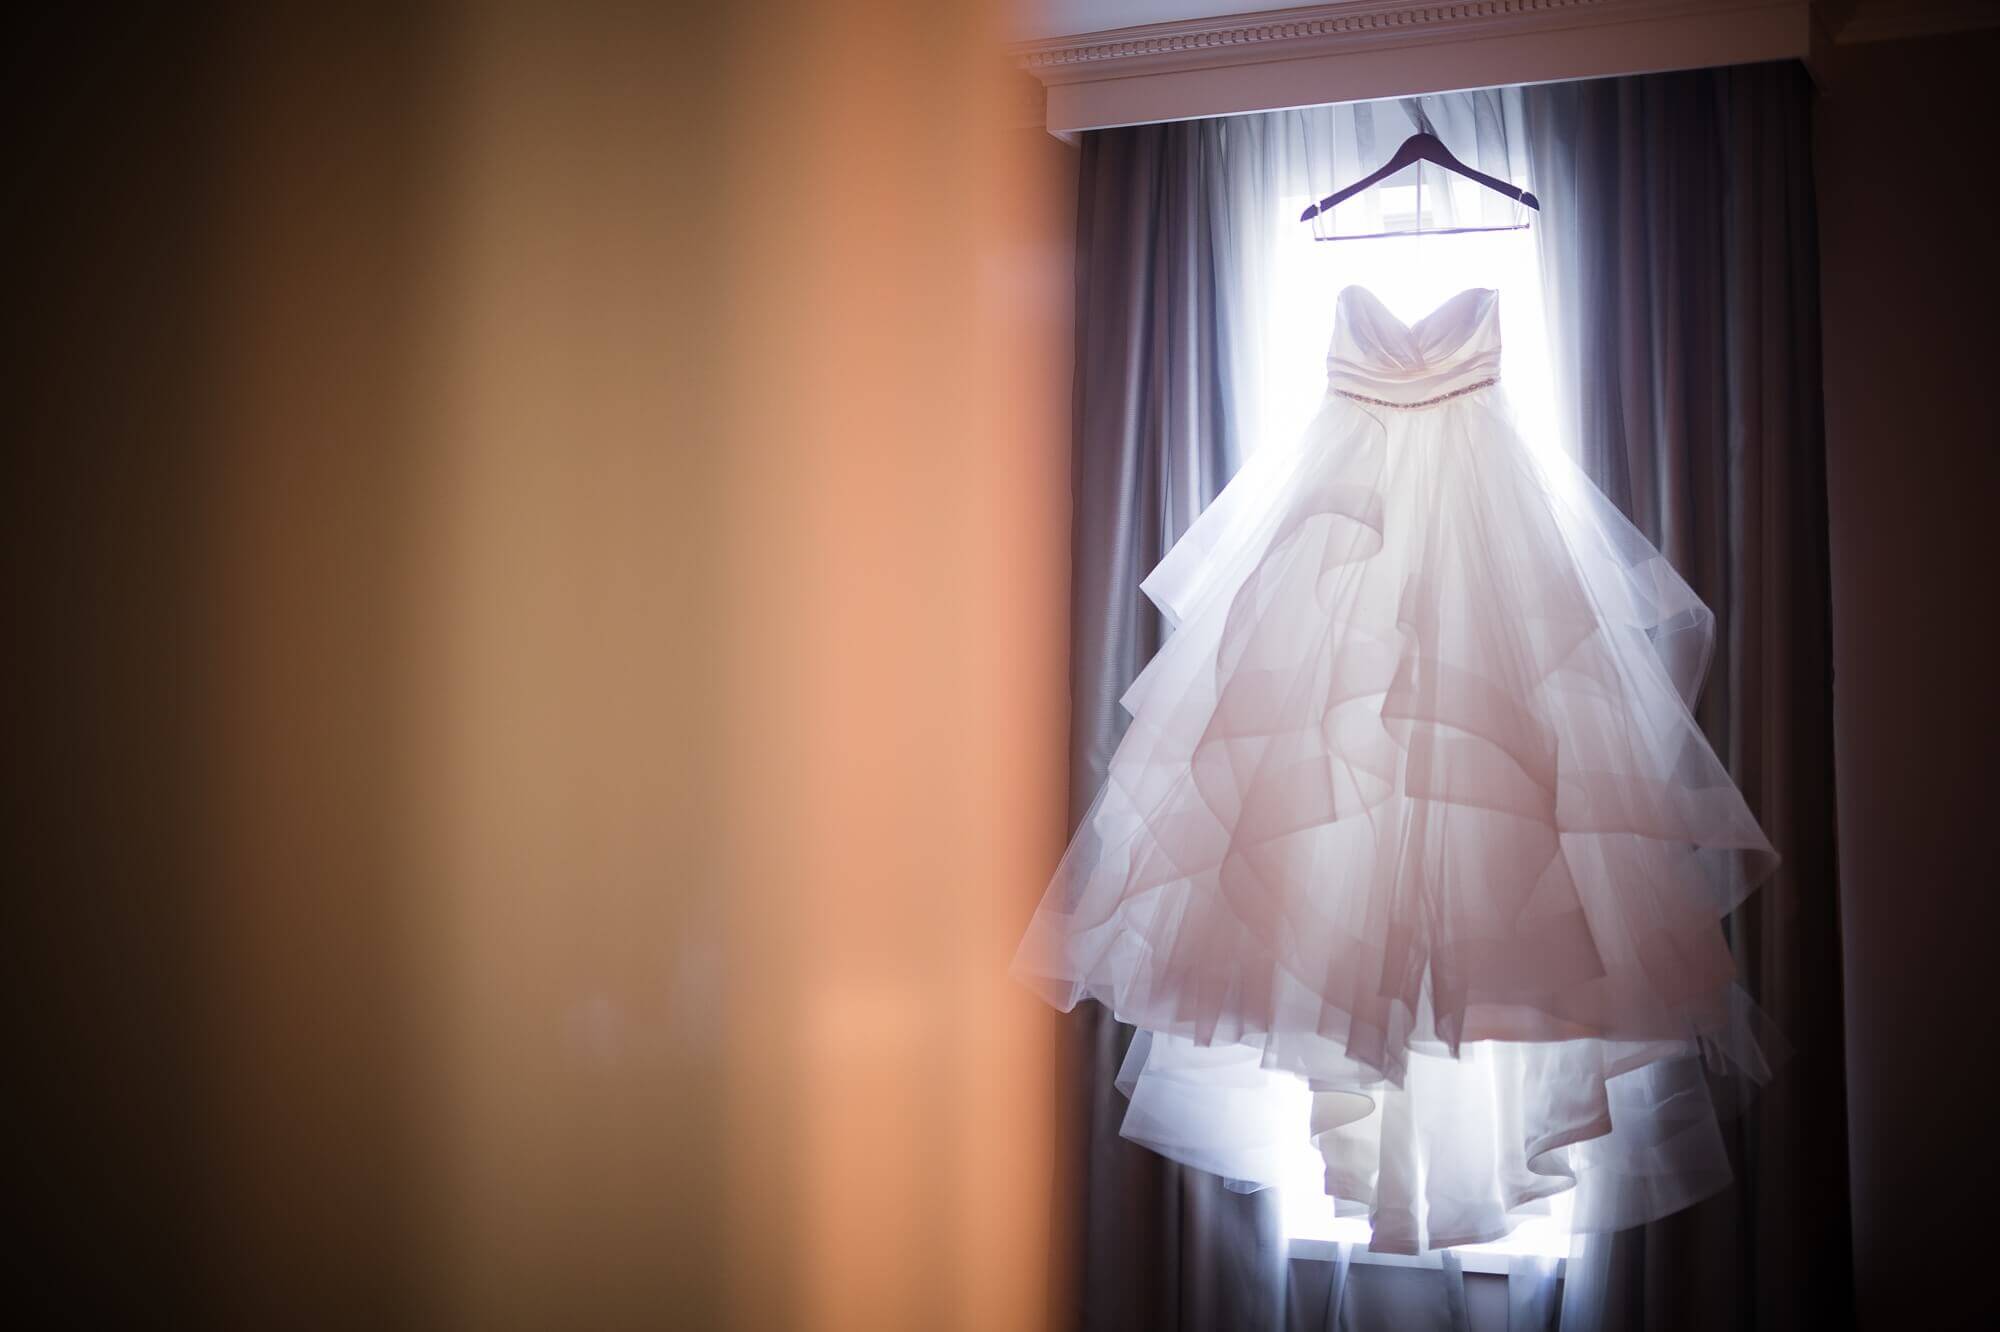 Beautiful detail shot of the dress hung in front of the window with a halo of light shining through